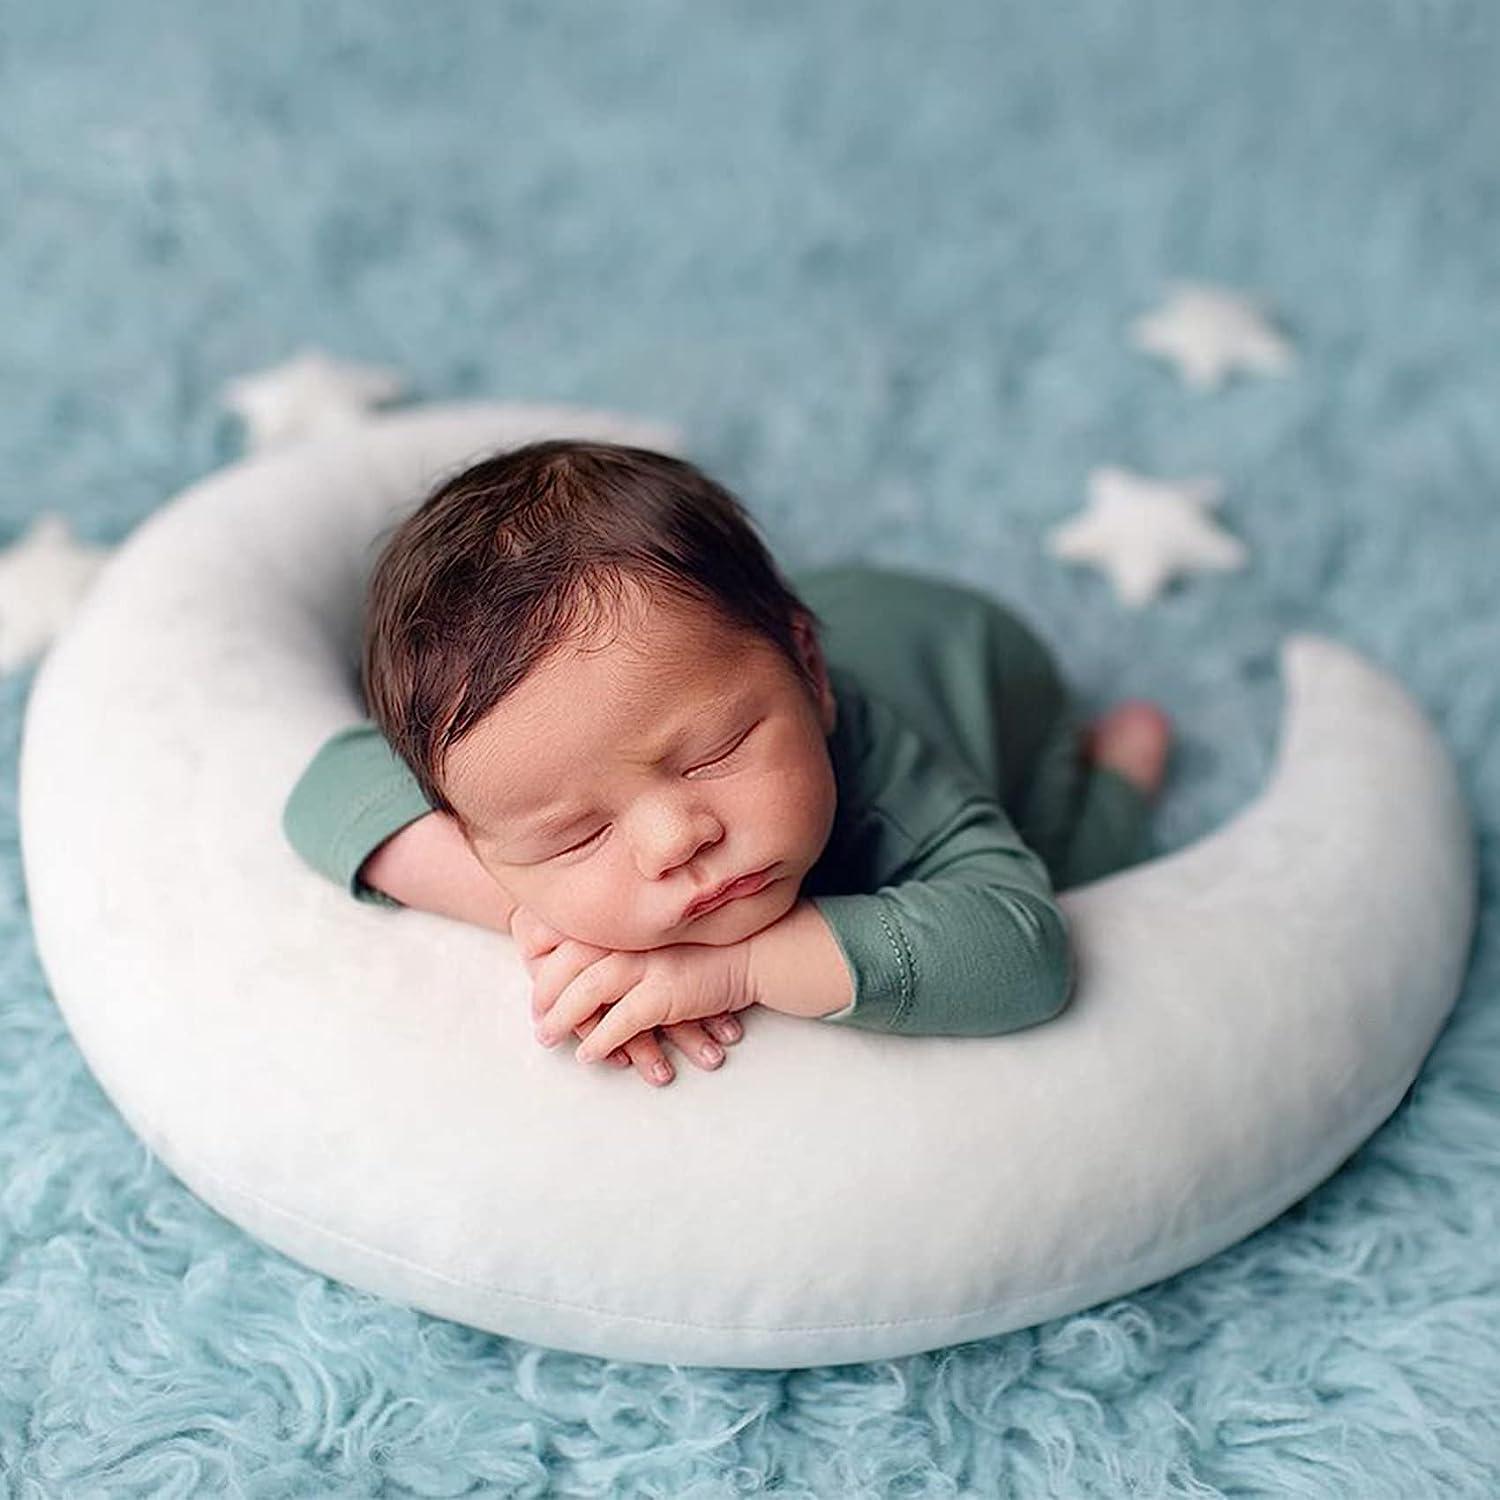 Tricks to Implement Bean Bag Posing During Newborn Photography